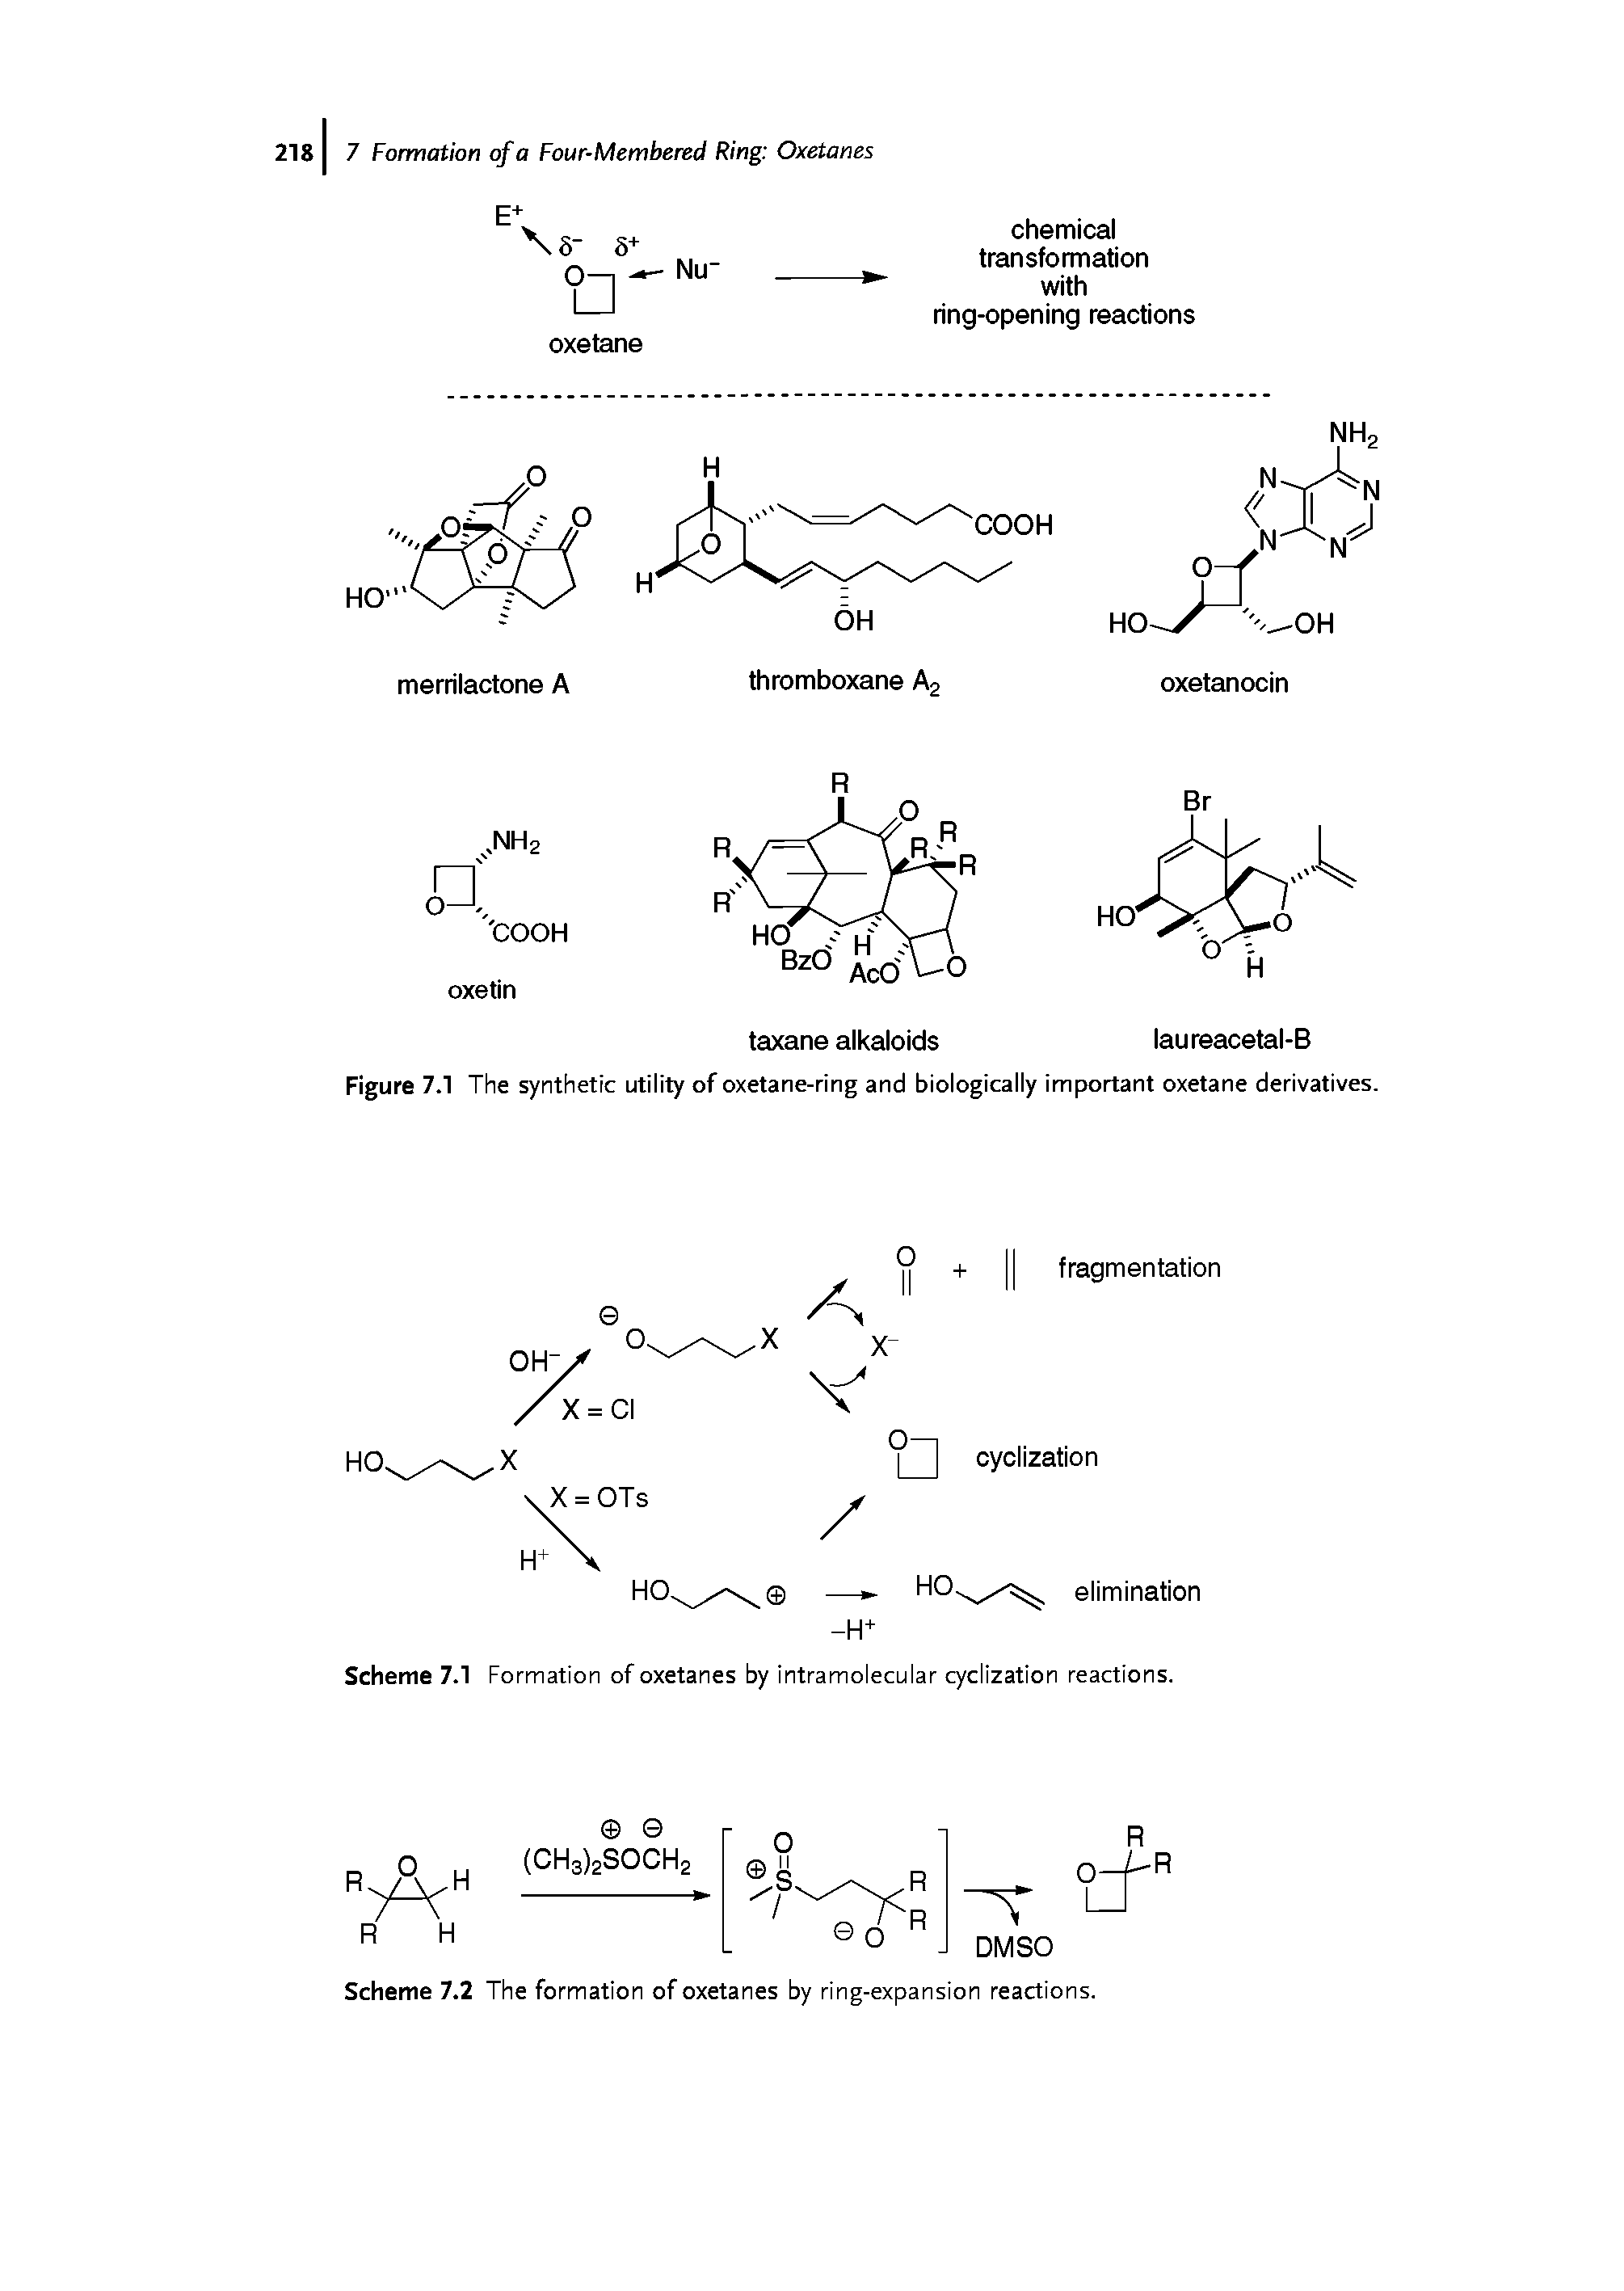 Scheme 7.1 Formation of oxetanes by intramolecular cyclization reactions.